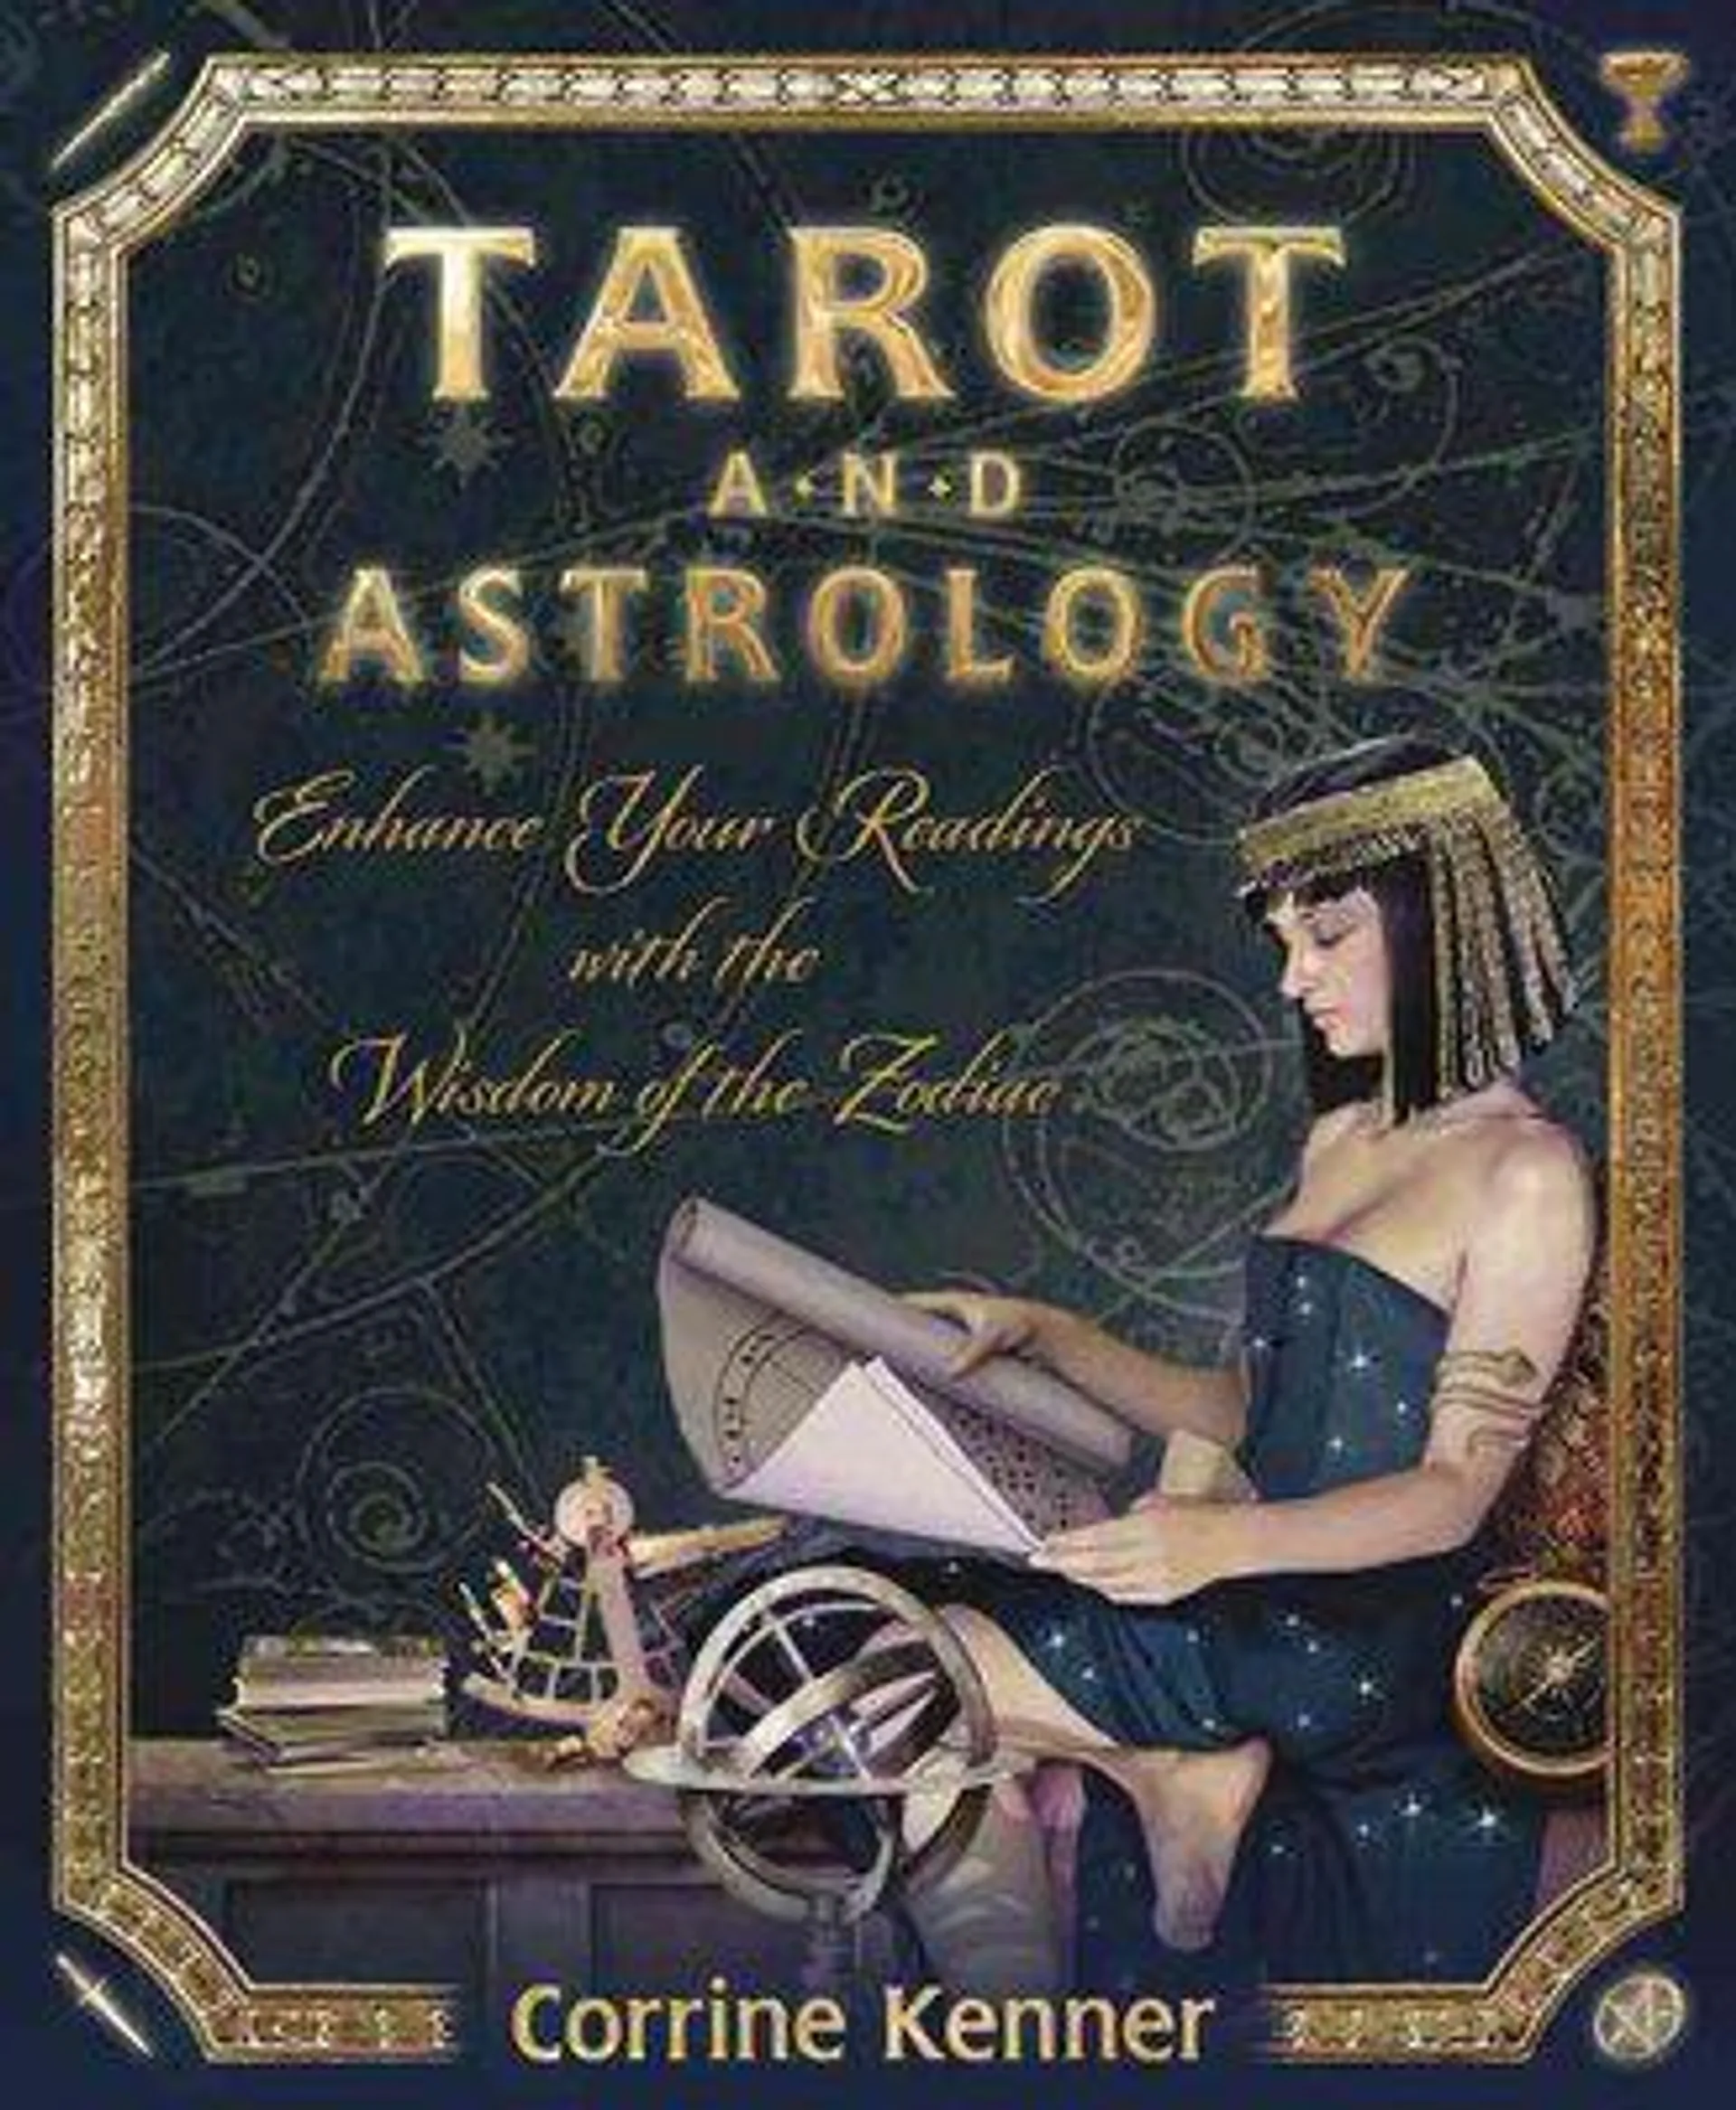 : Enhance Your Readings with the Wisdom of the Zodiac